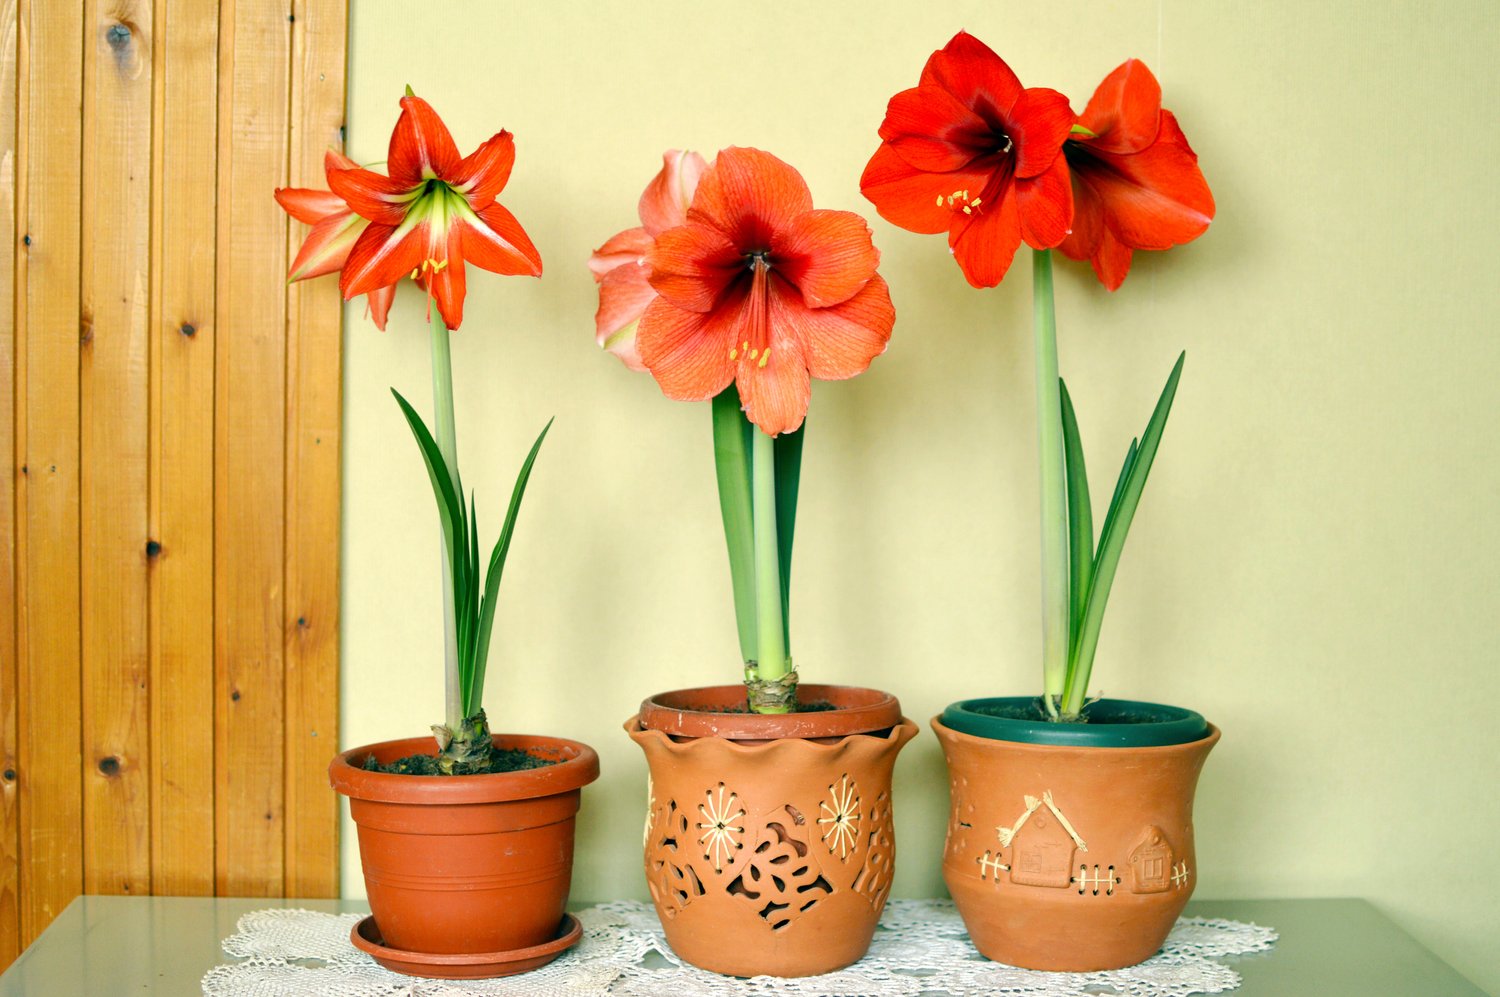 How to Use a Huge Waxed Amaryllis as Décor?